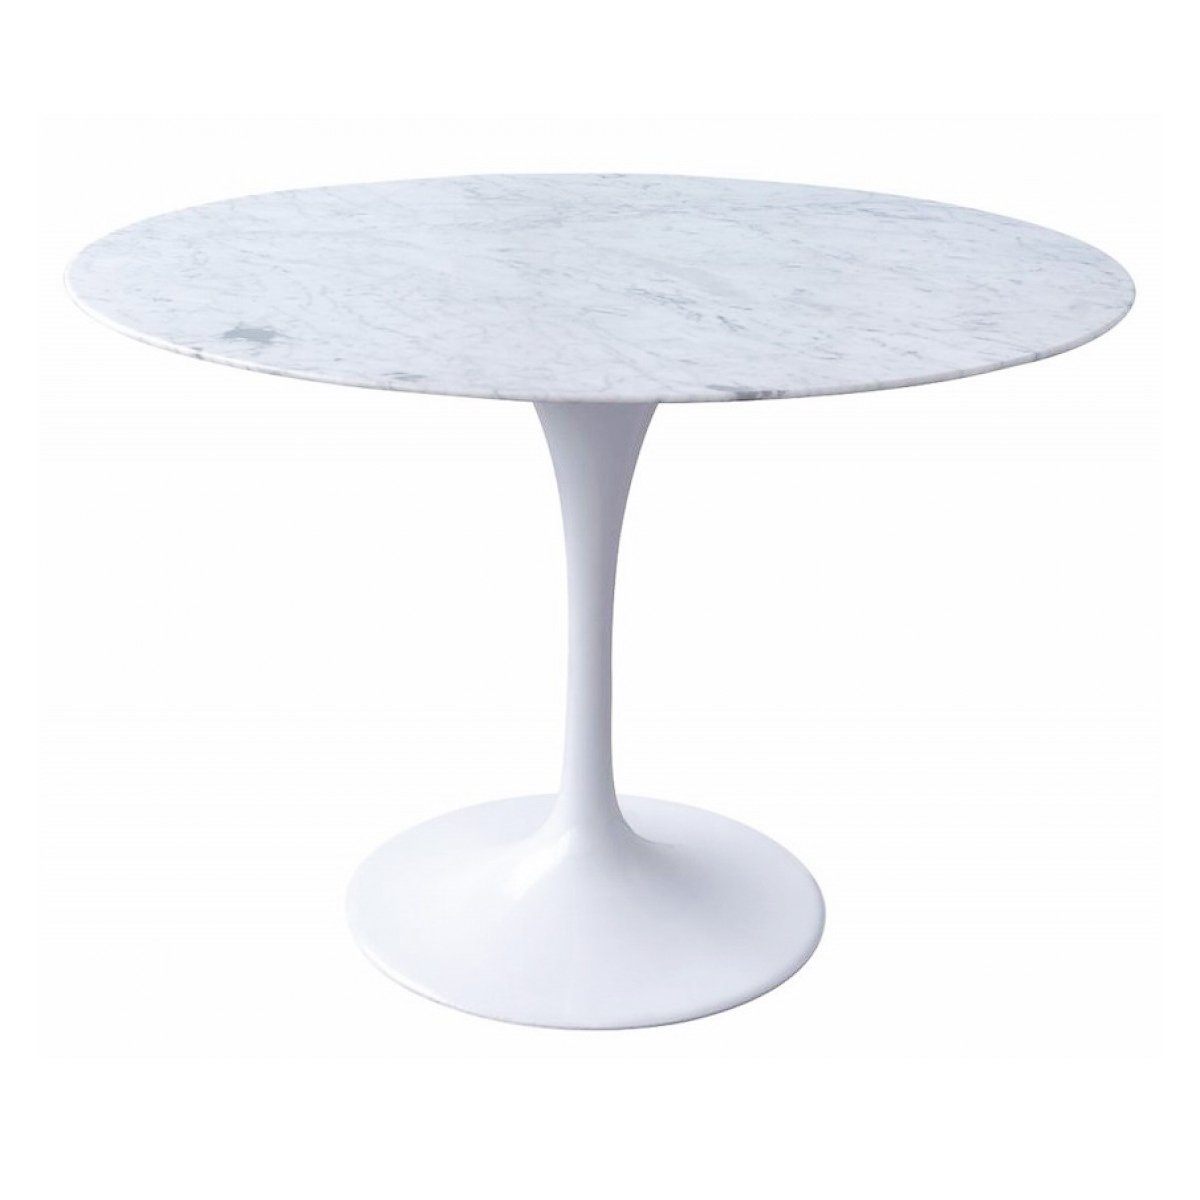 Rose 90cm Round Marble Dining Table - White - Dining Tables